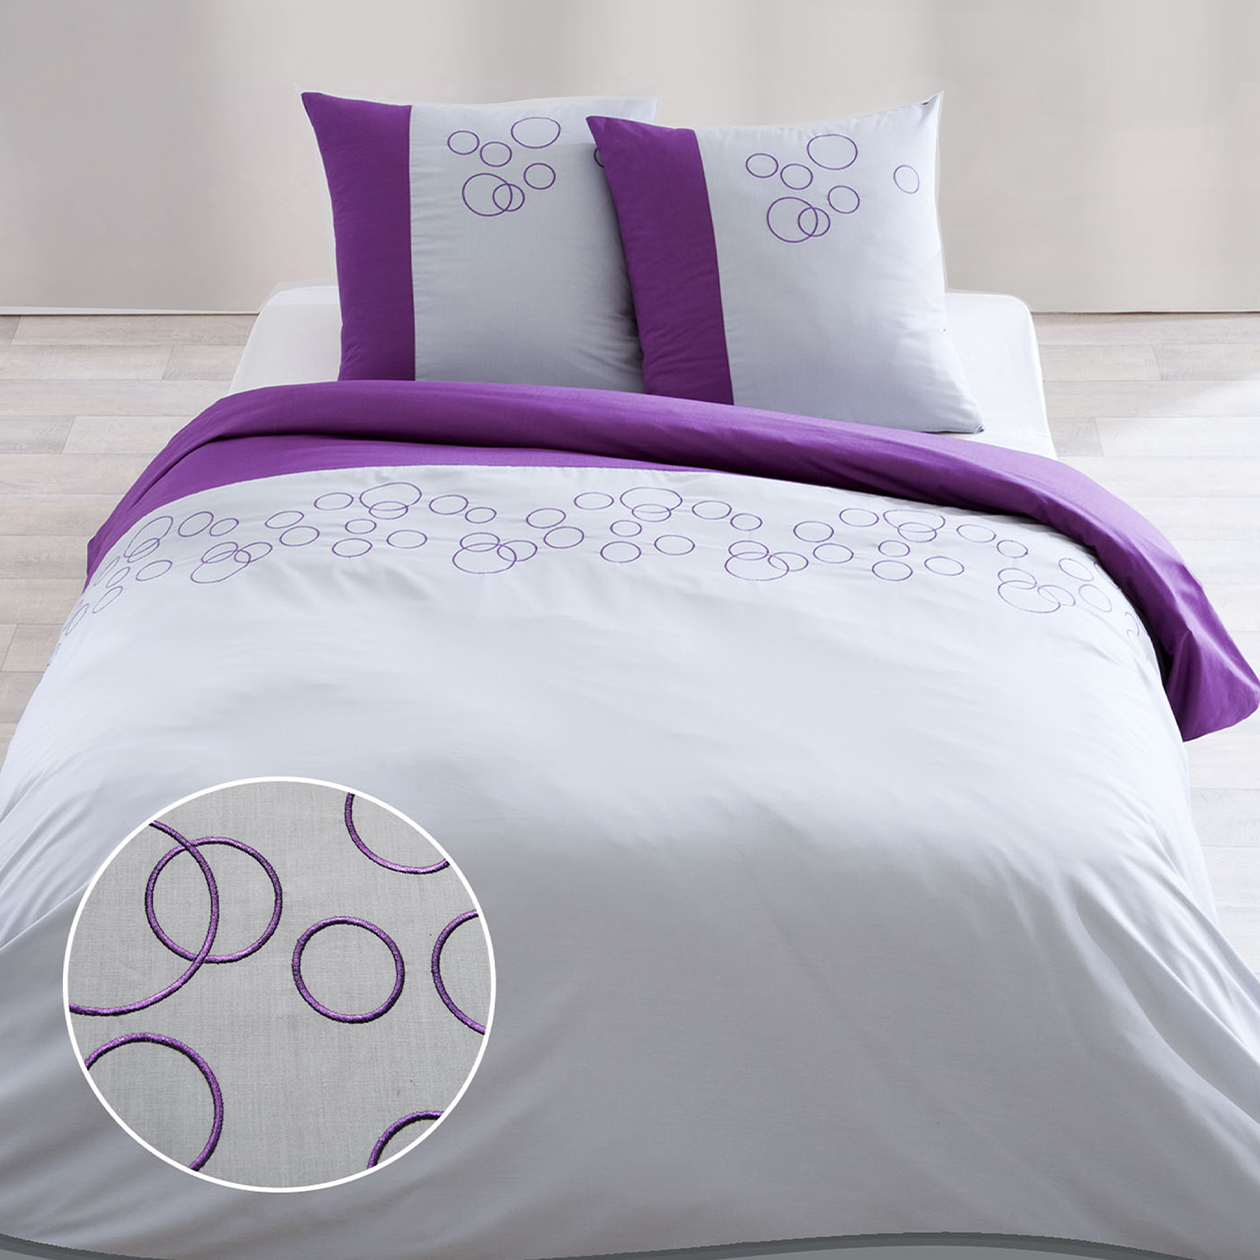 Bedding Set (embroidery)